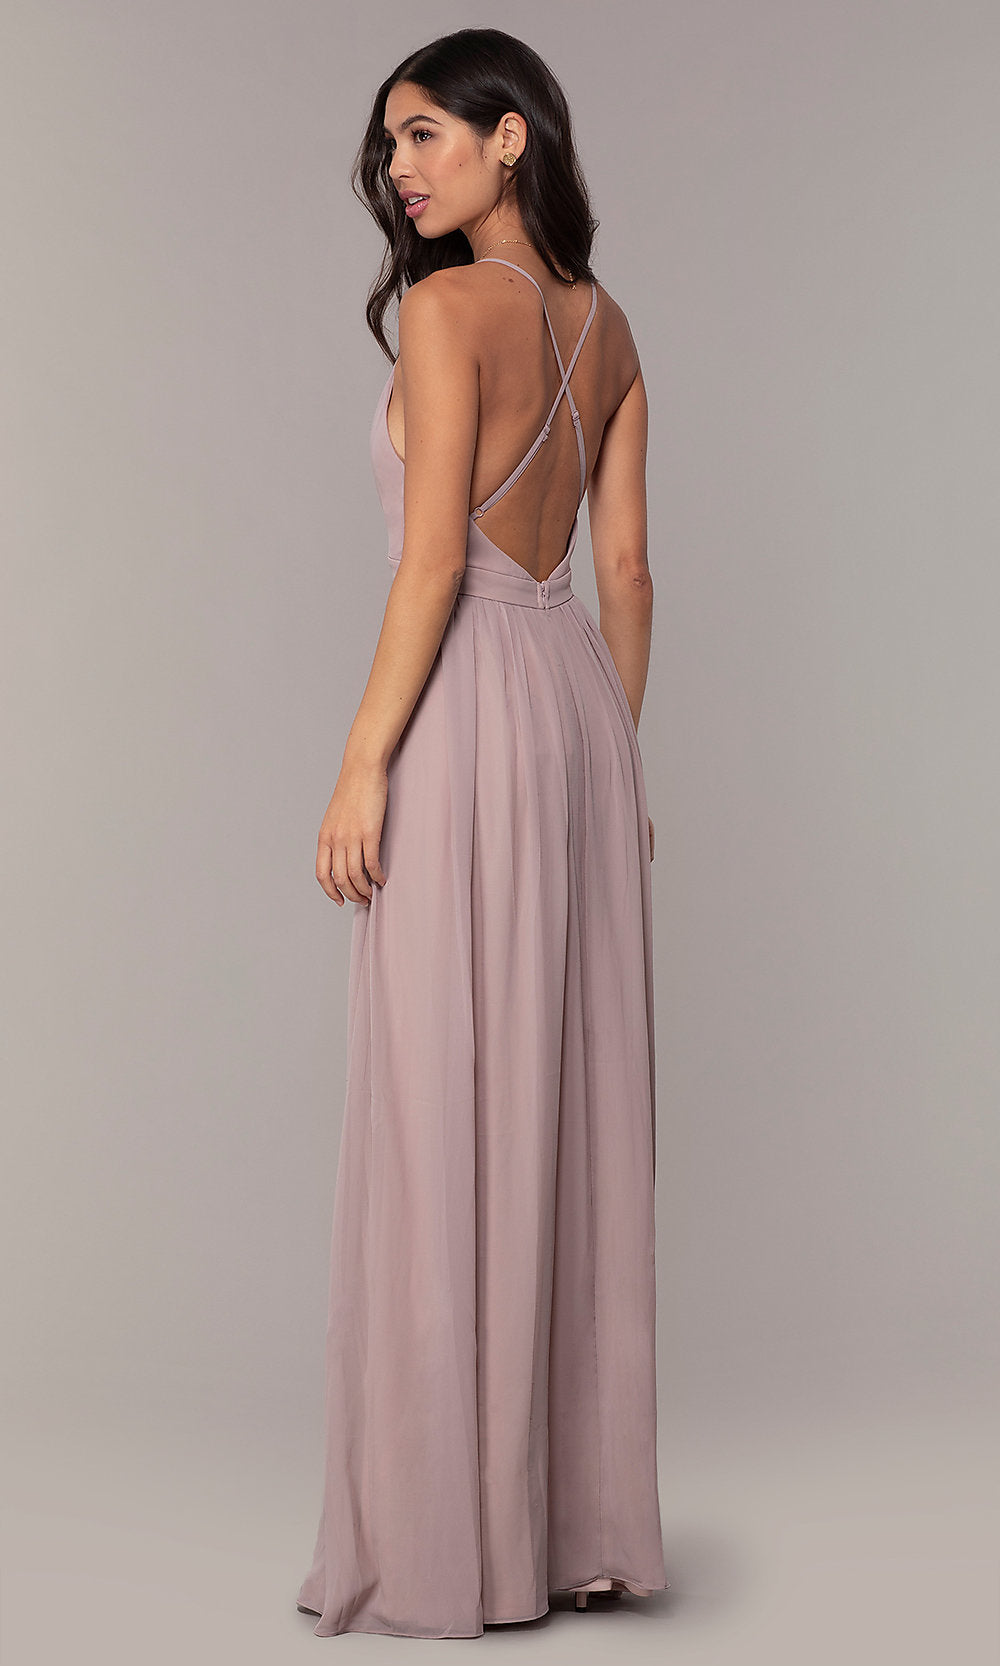 Chiffon Simply Prom Dress with Adjustable Straps